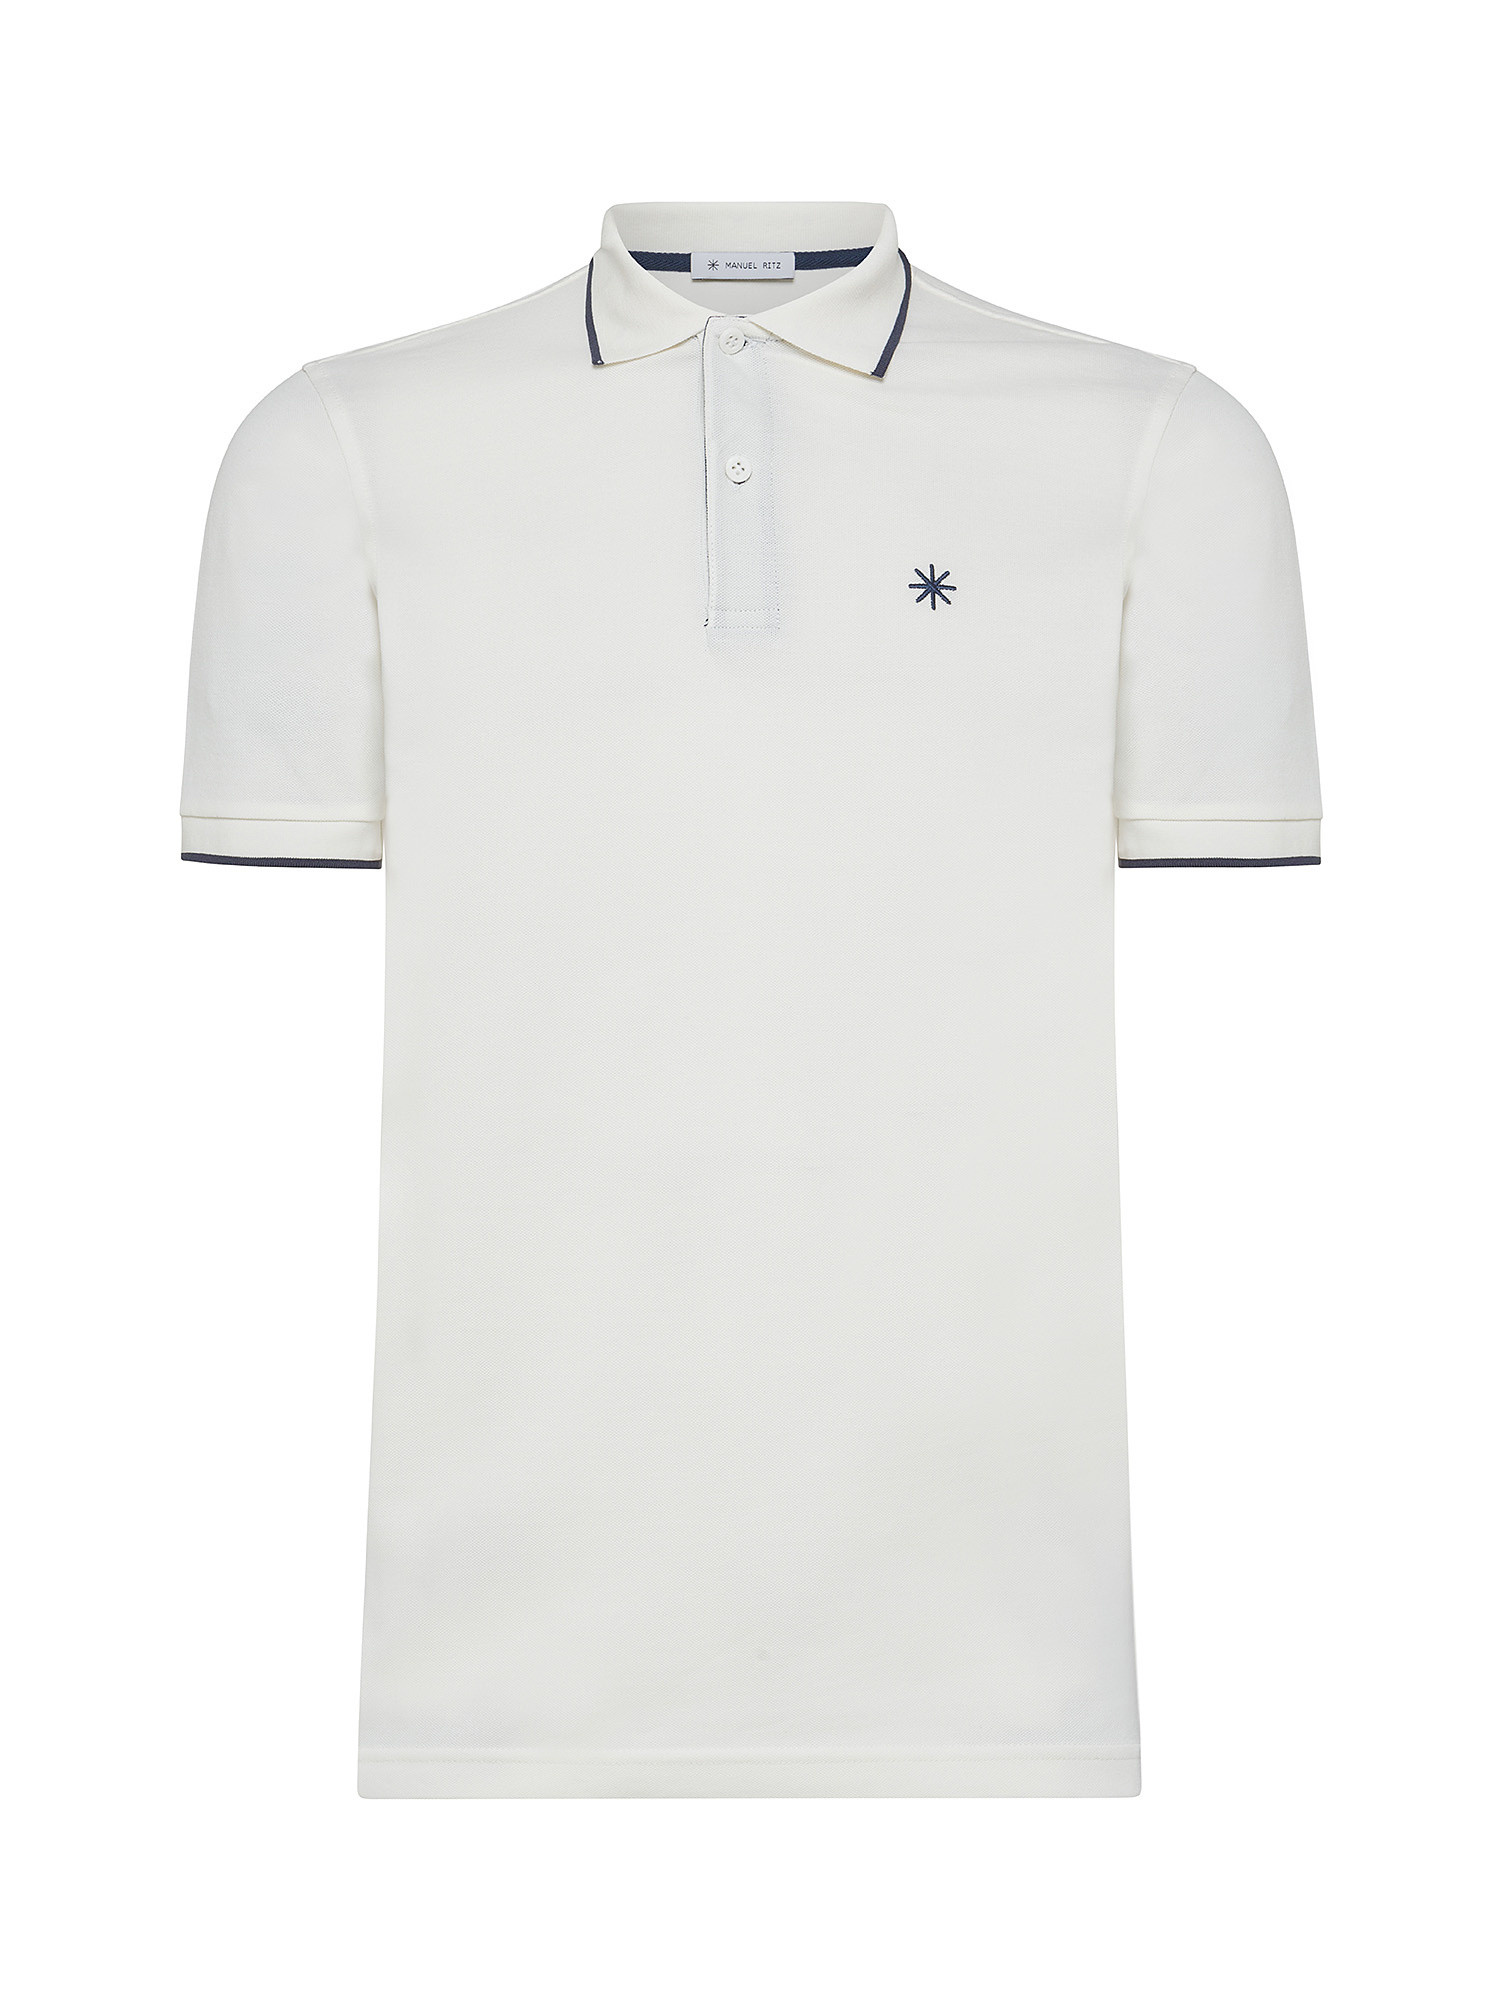 Manuel Ritz - Polo with contrasting edges and logo, White, large image number 0